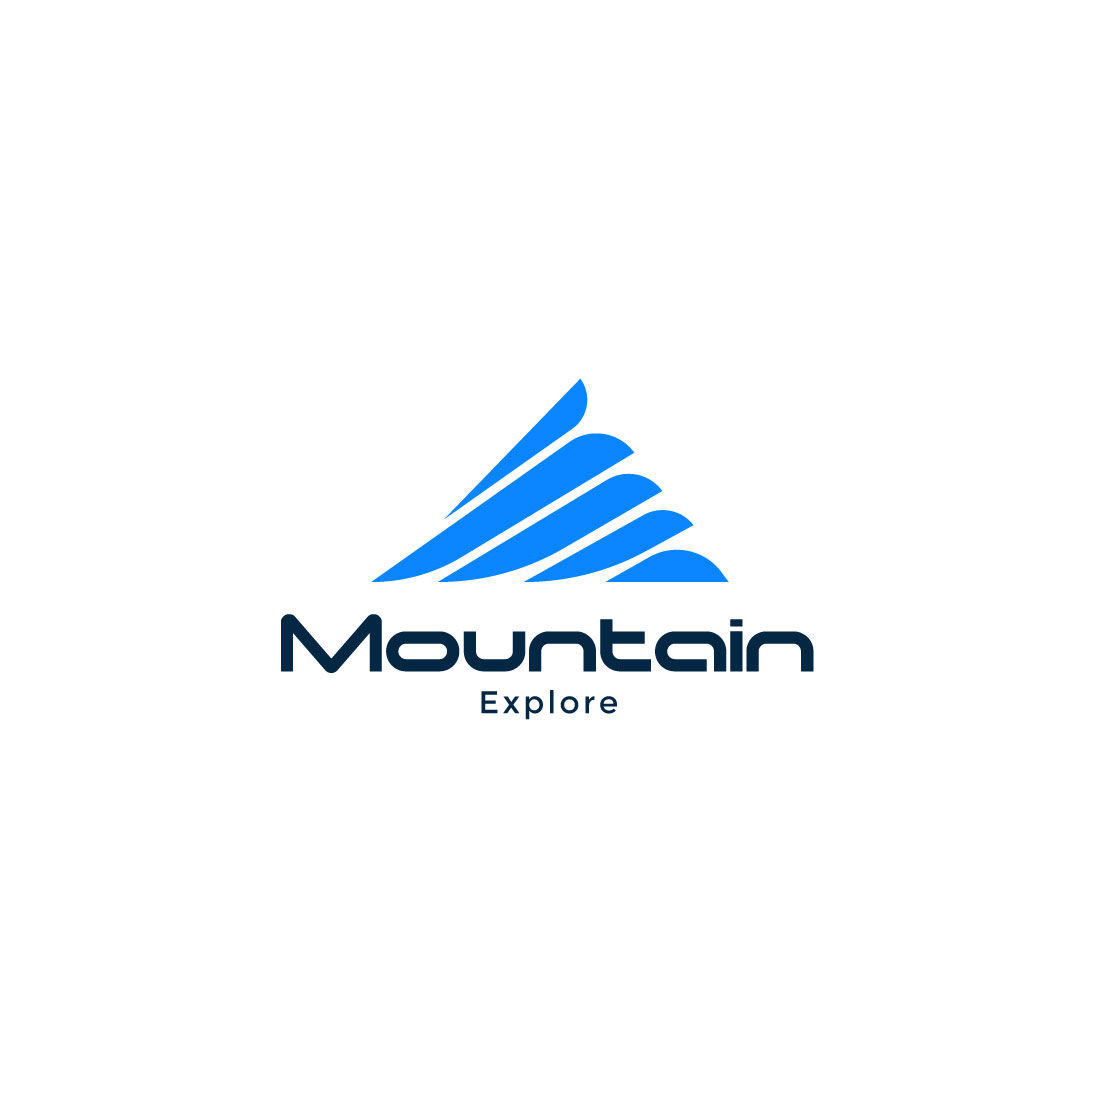 Mountain logo with the word explore.